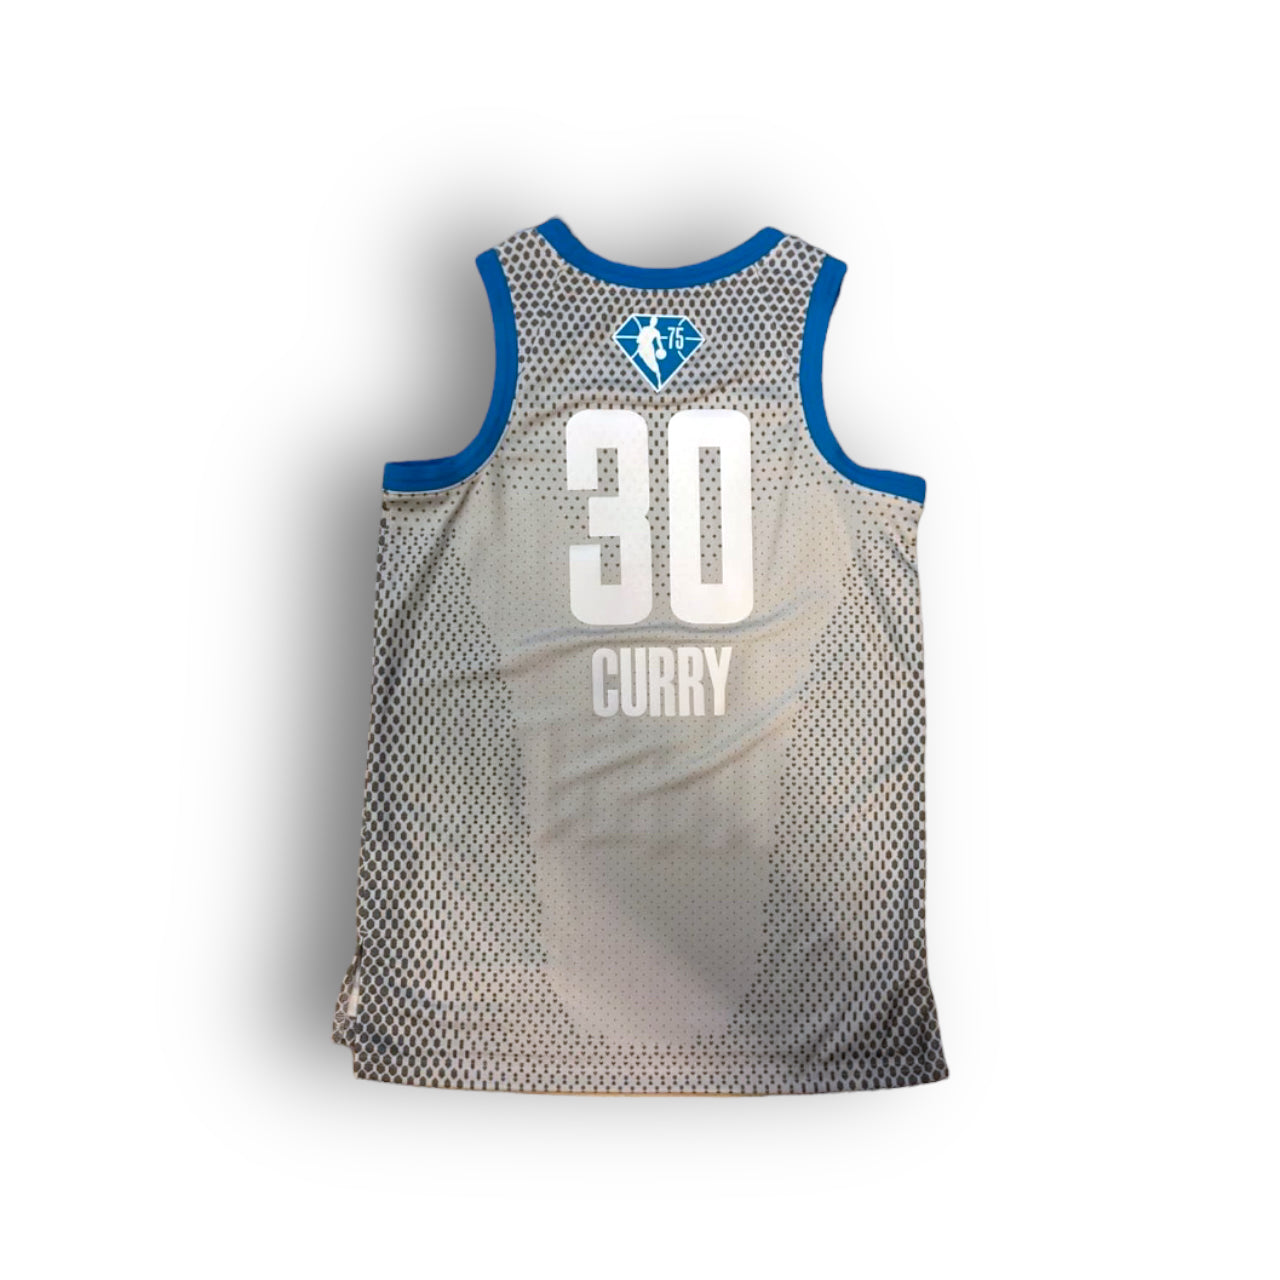 Stephen Curry All-Star Team 2022 All-Star Game Nike Swingman Jersey Silver/Blue - Hoop Jersey Store